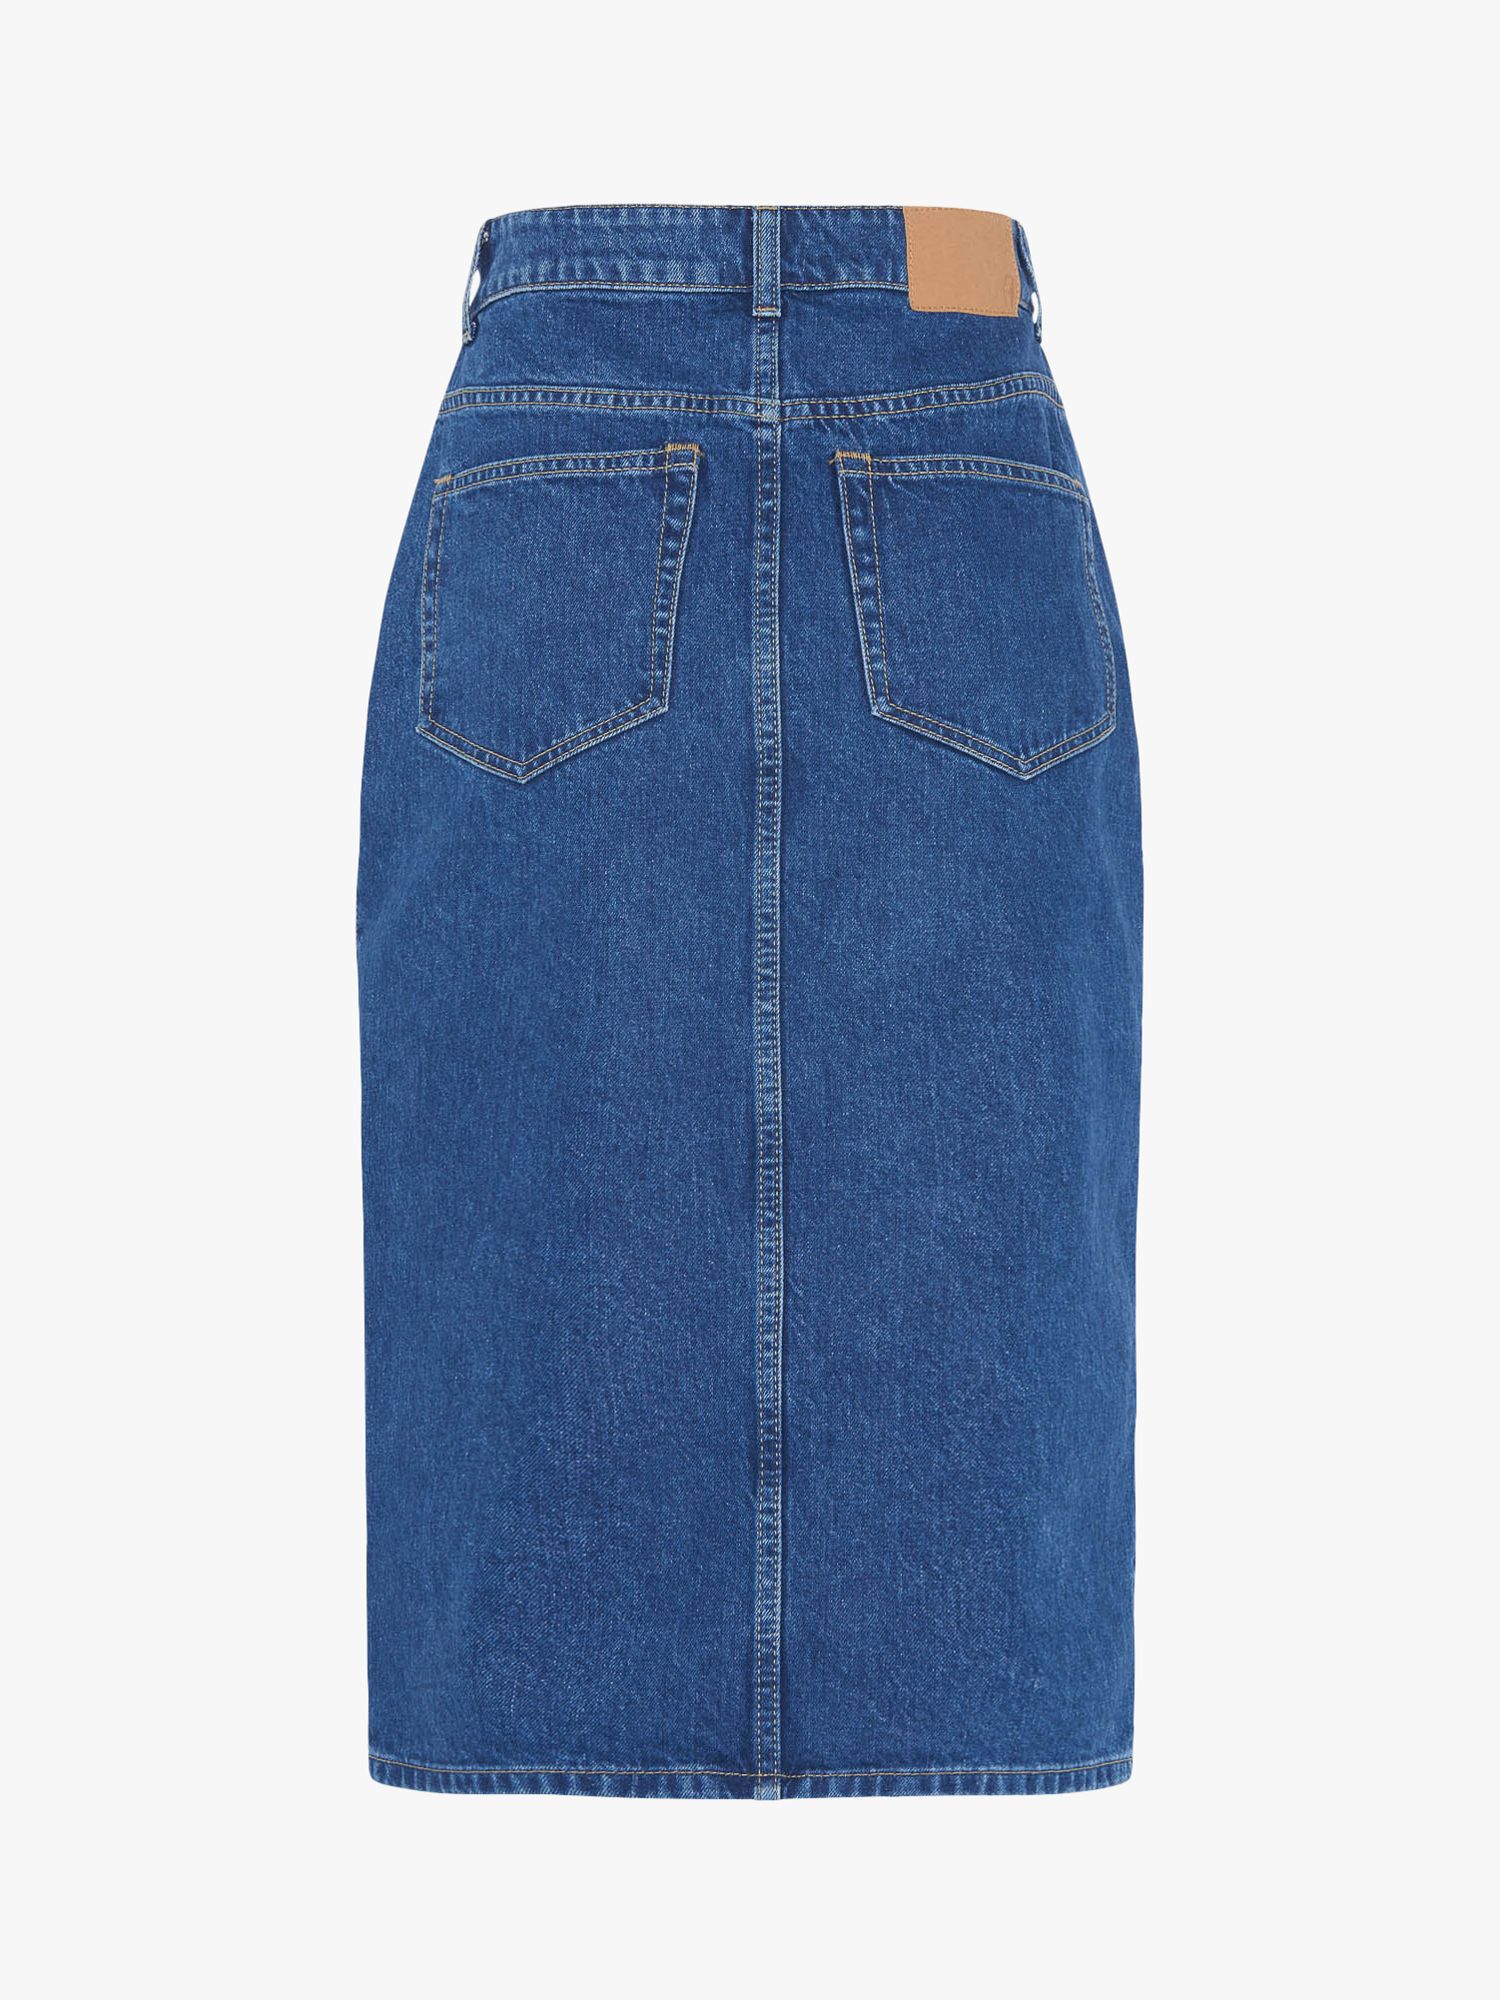 French Connection Reo Denim Skirt